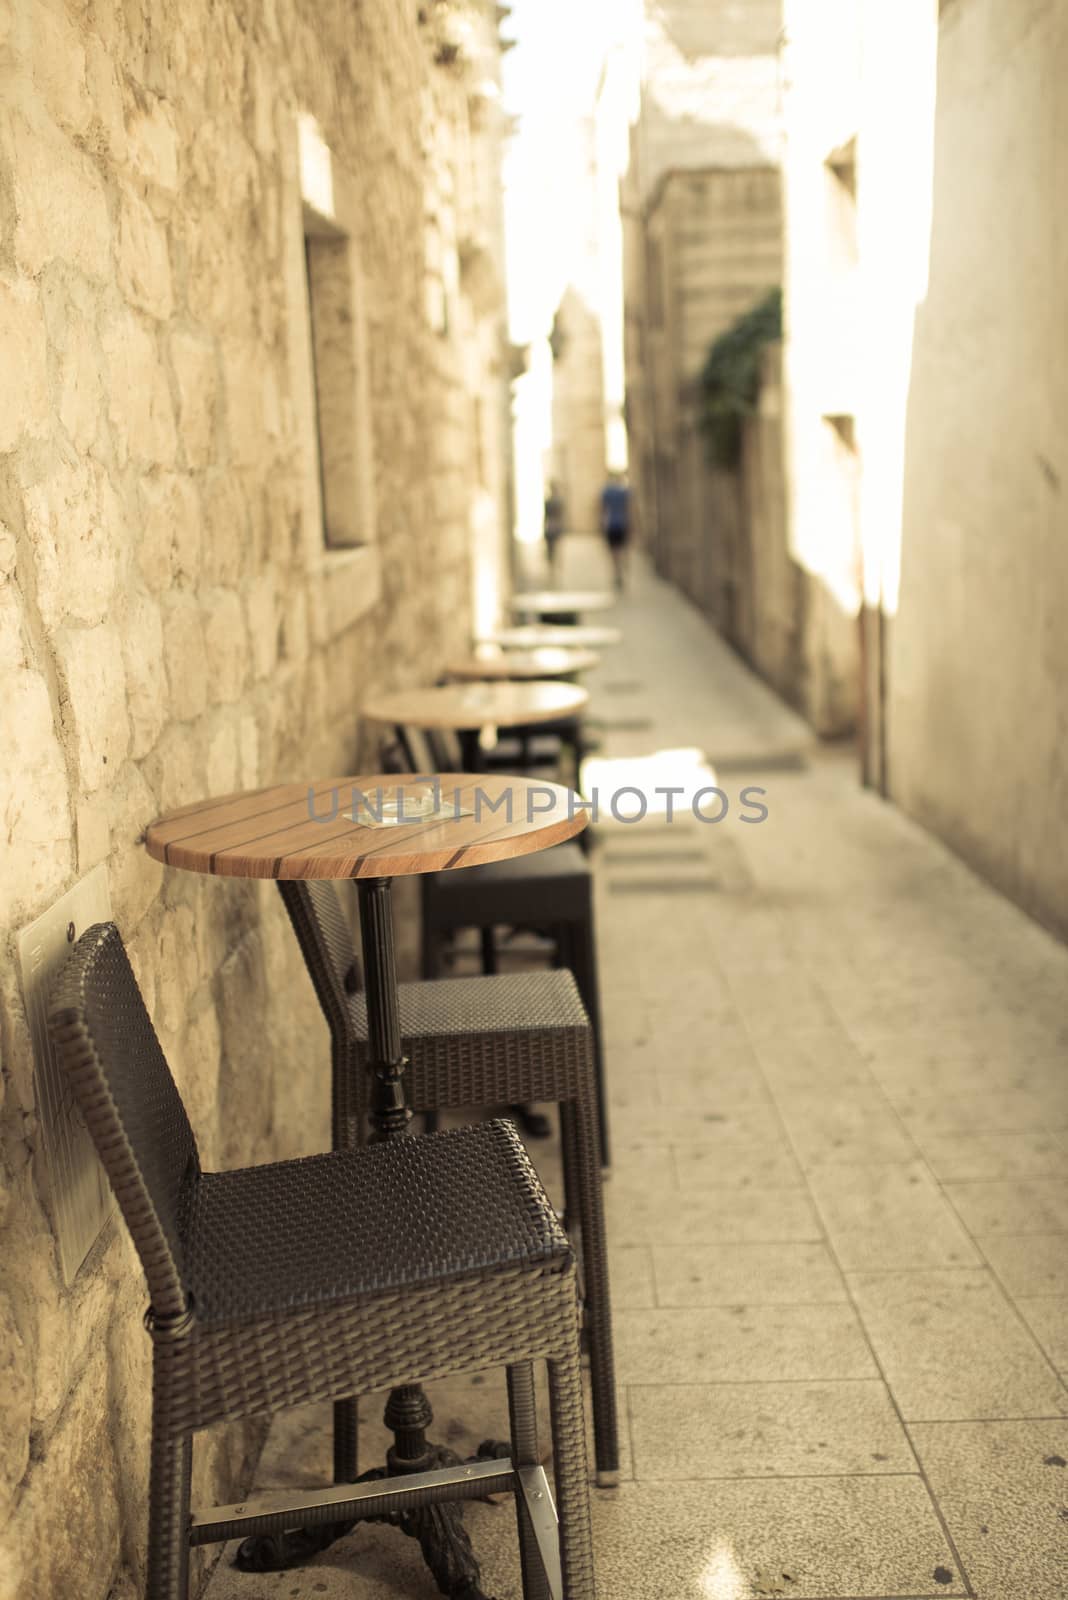 Narrow street of old town with old sandstone buildings, in foreground caffee table and chairs, outdoor photo.